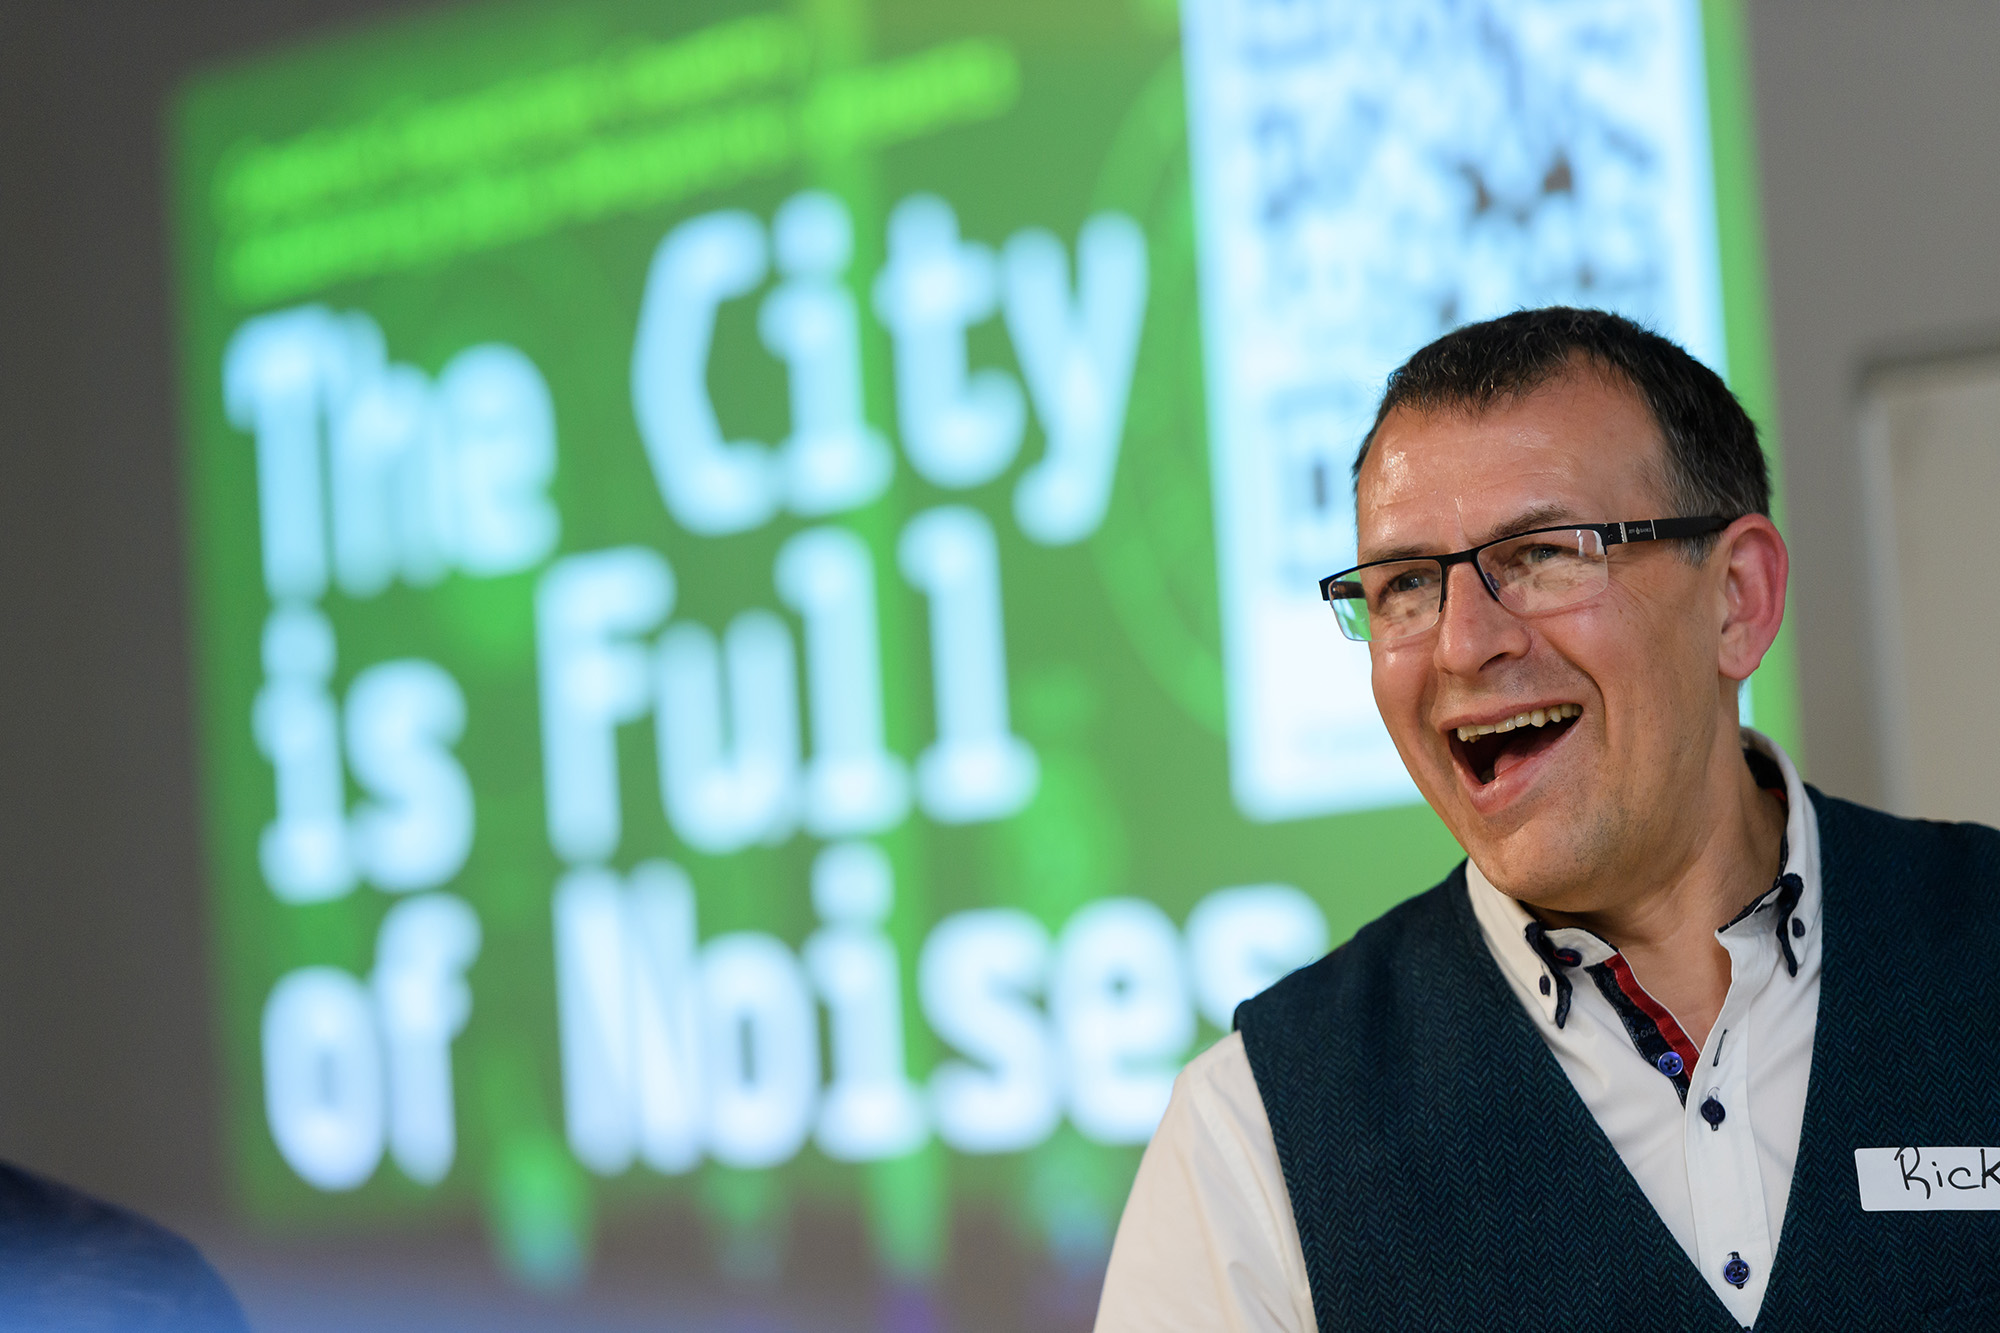 A photo of Rick Holt from Frequency Central smiling. He is standing in front of a screen with "The City is Full of Noises" projected onto it